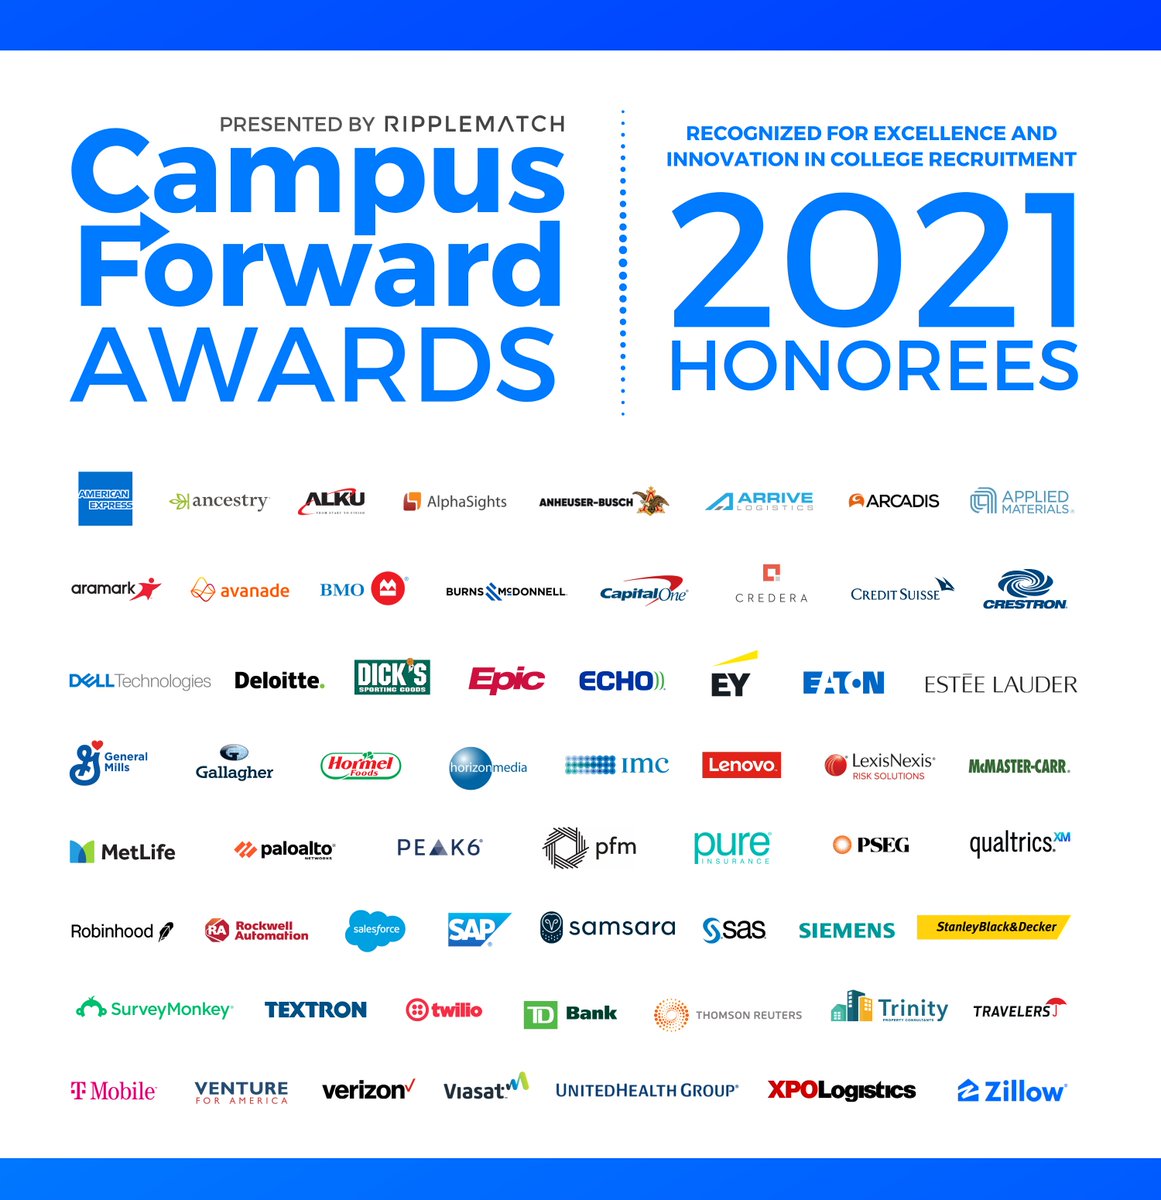 Horizon is happy to announce we’ve been recognized as one of @RippleMatch’s 2021 Campus Forward Award Honorees! Huge congrats to our Campus Recruiting team! resources.ripplematch.com/2021-campus-fo…